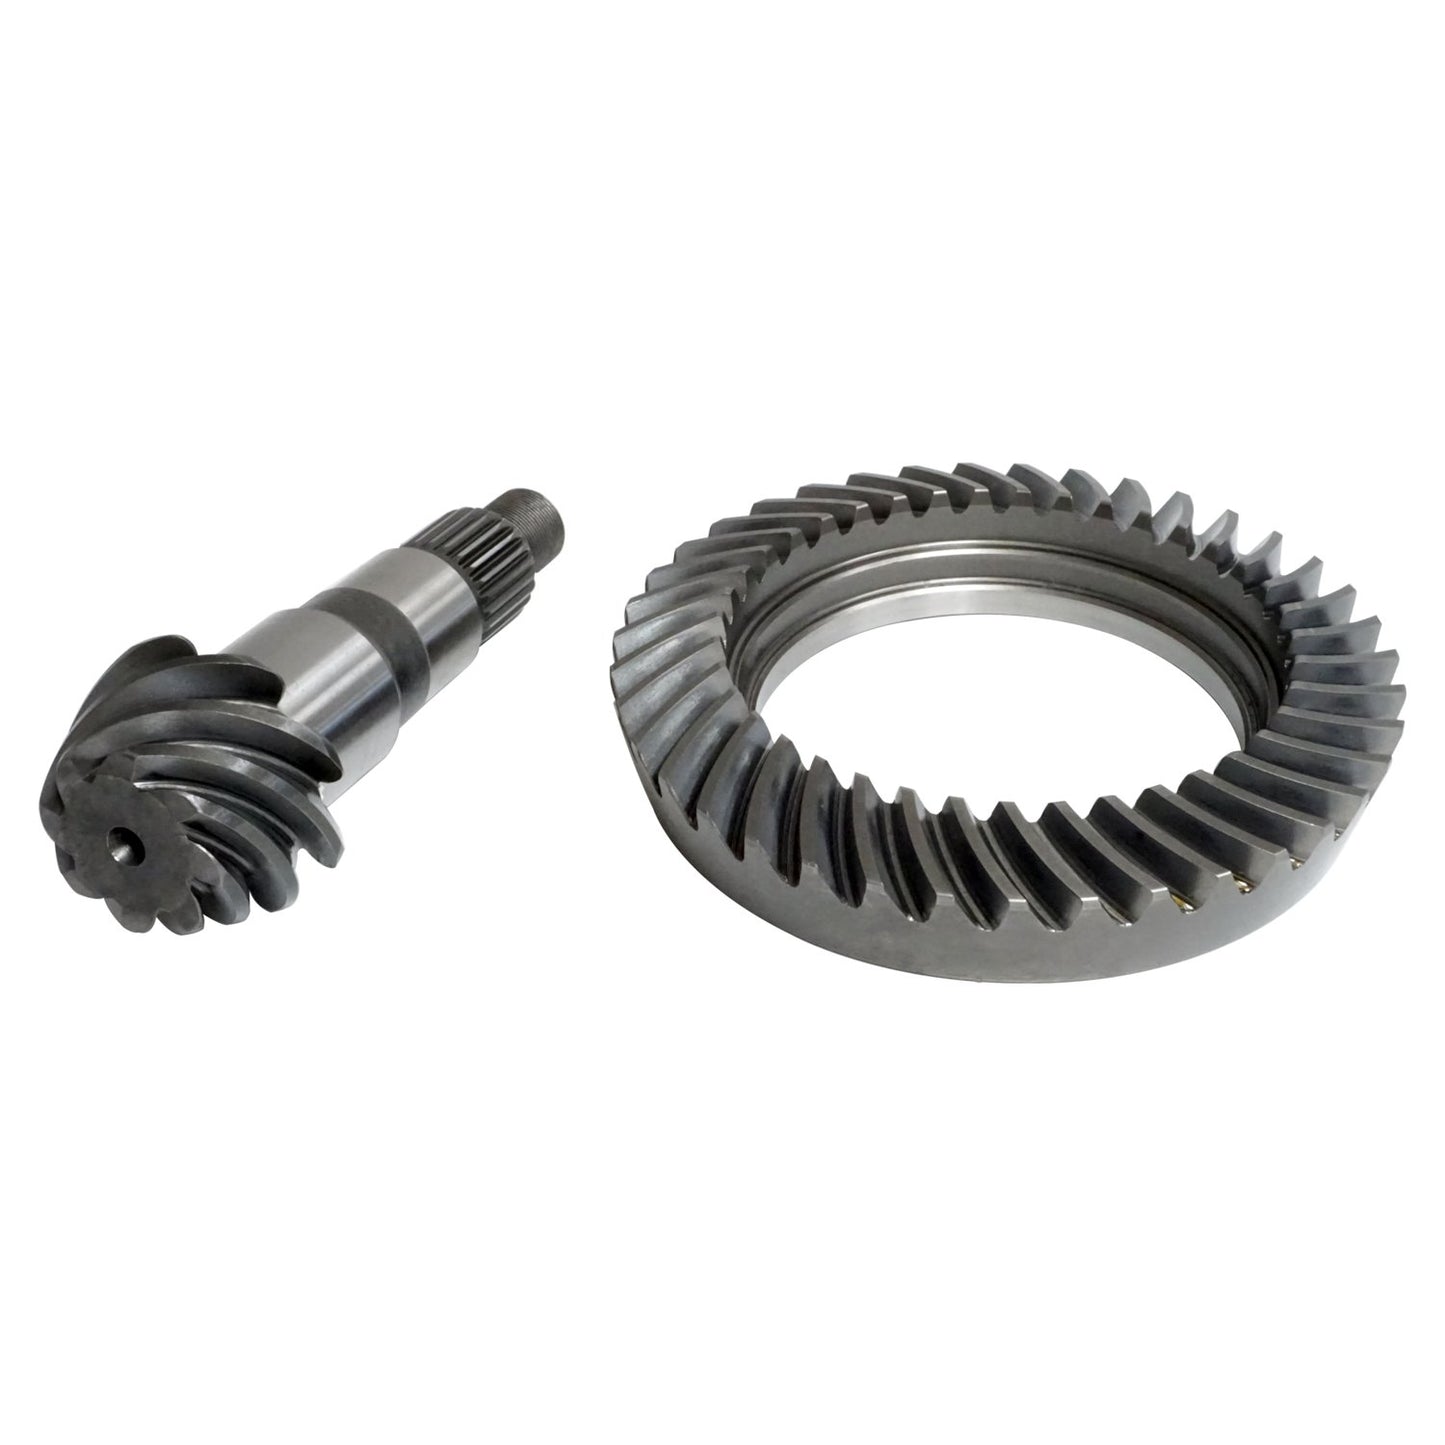 RING & PINION FOR 07-18 JEEP JK WRANGLERS W/ DANA 30 FRONT AXLE; 4.56 RATIO